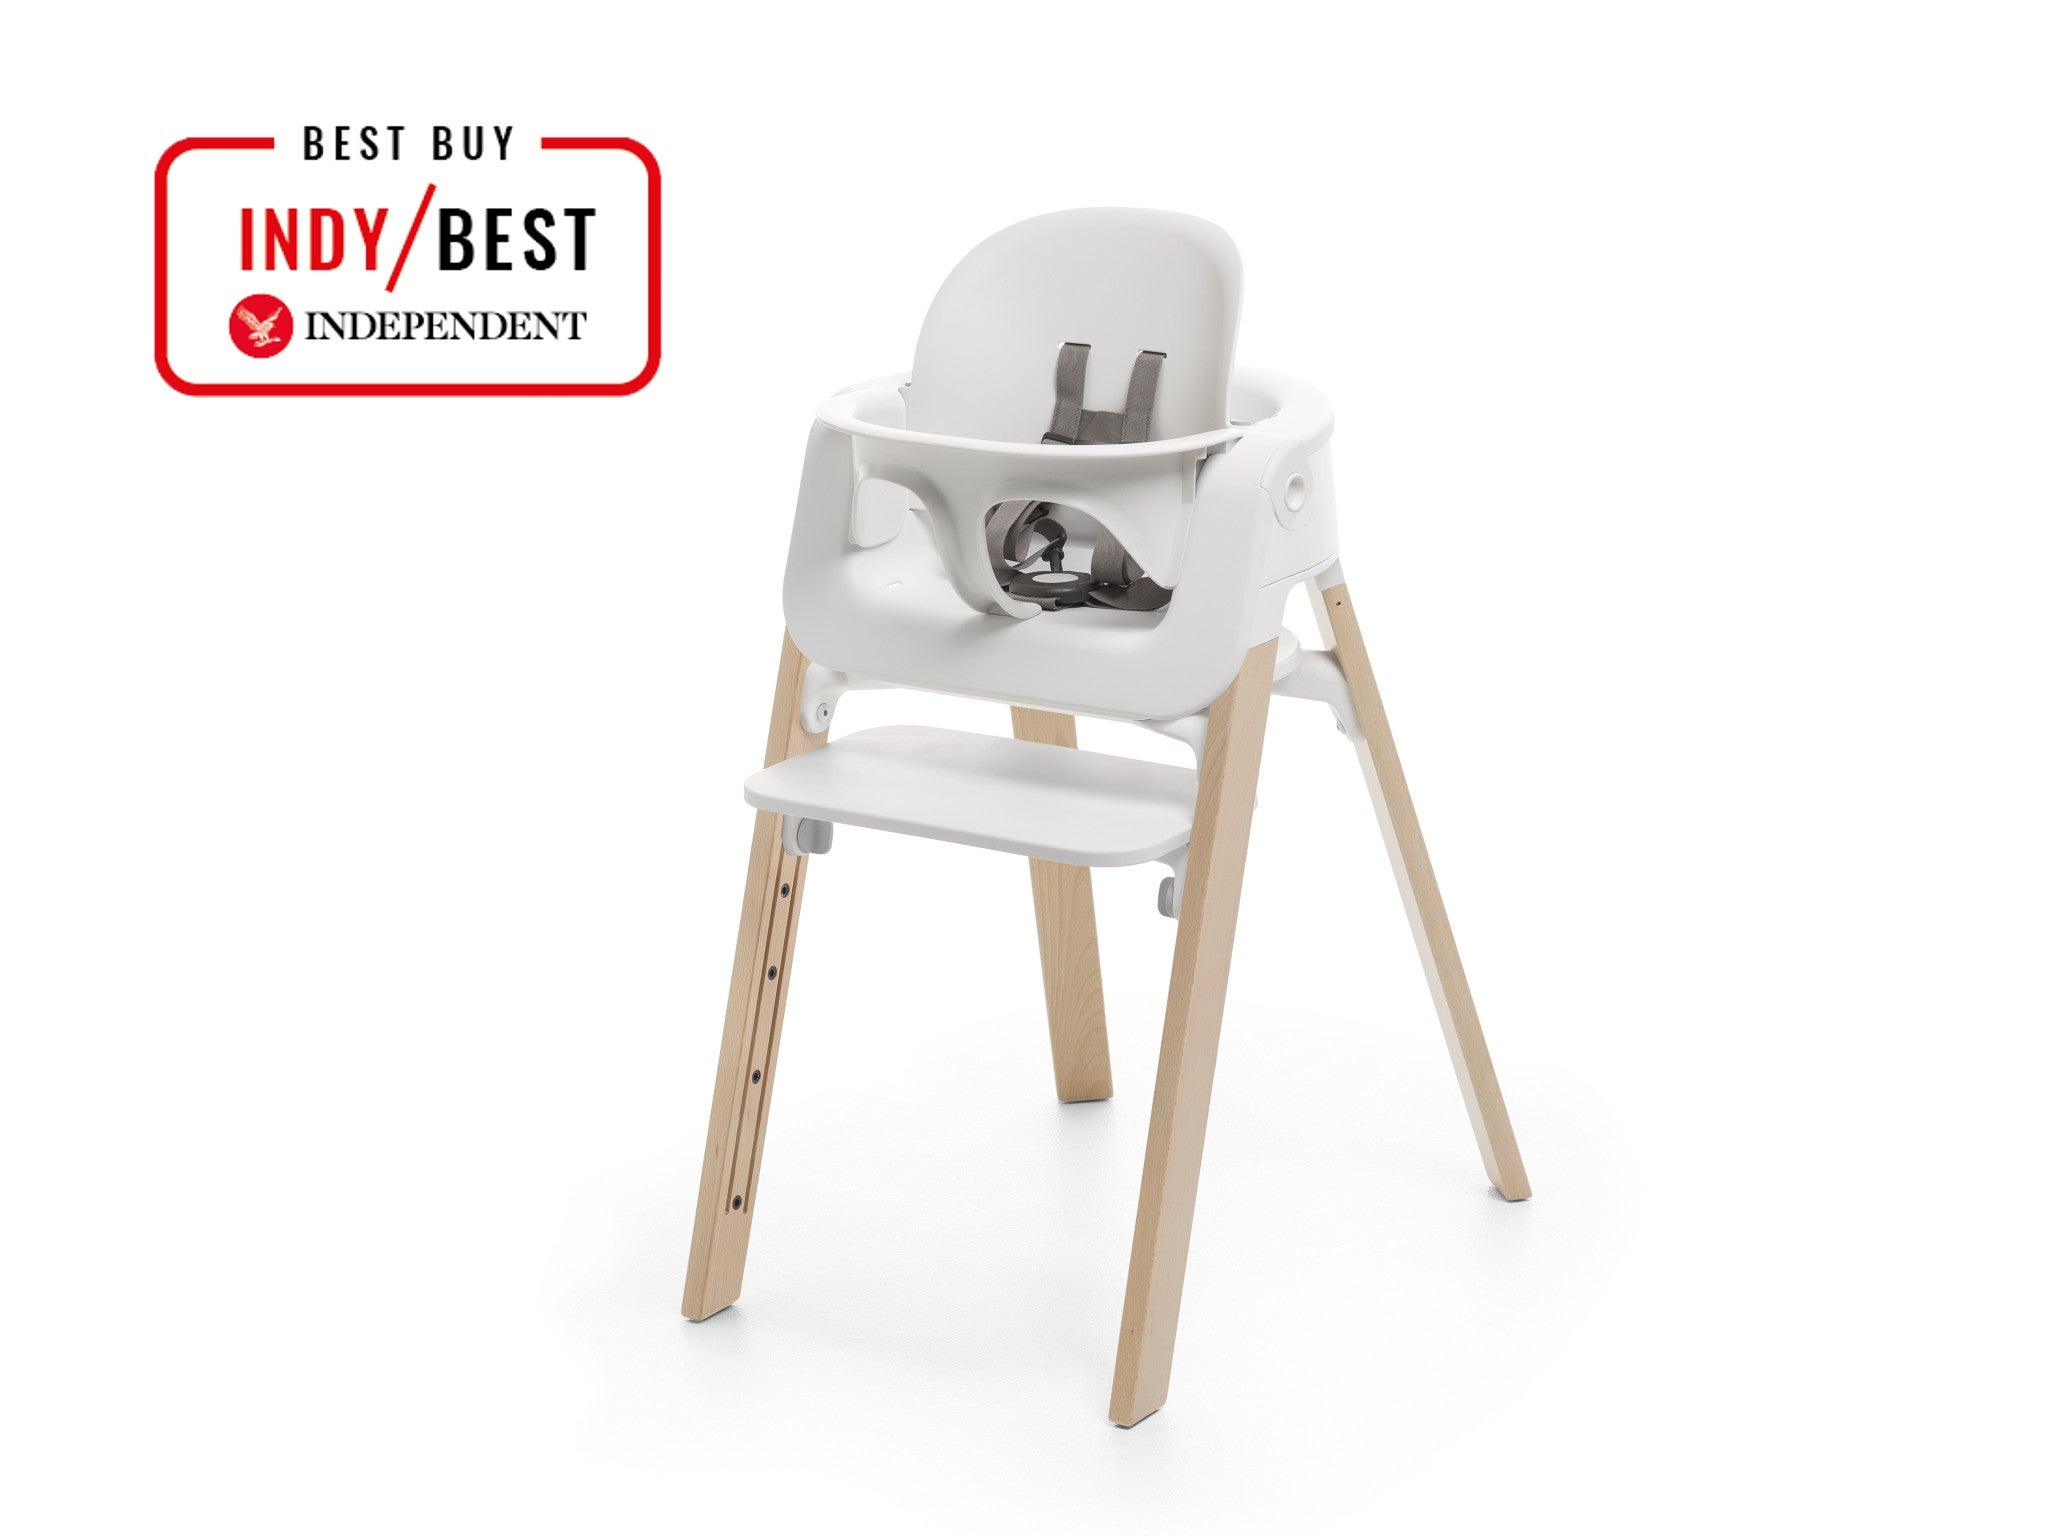 Stokke steps chair indybest